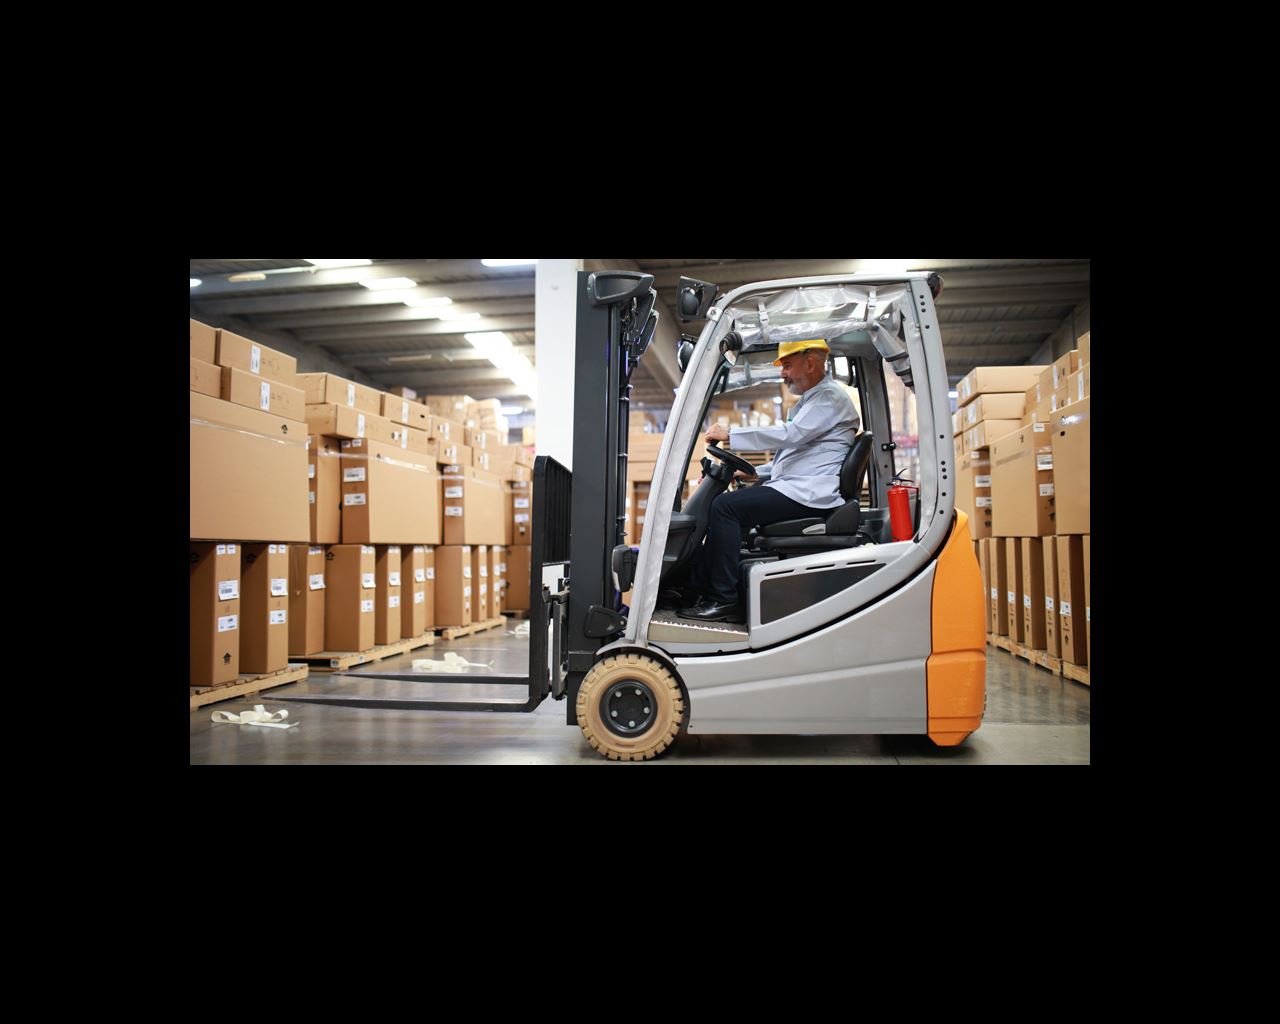 Man in warehouse operating a forklift